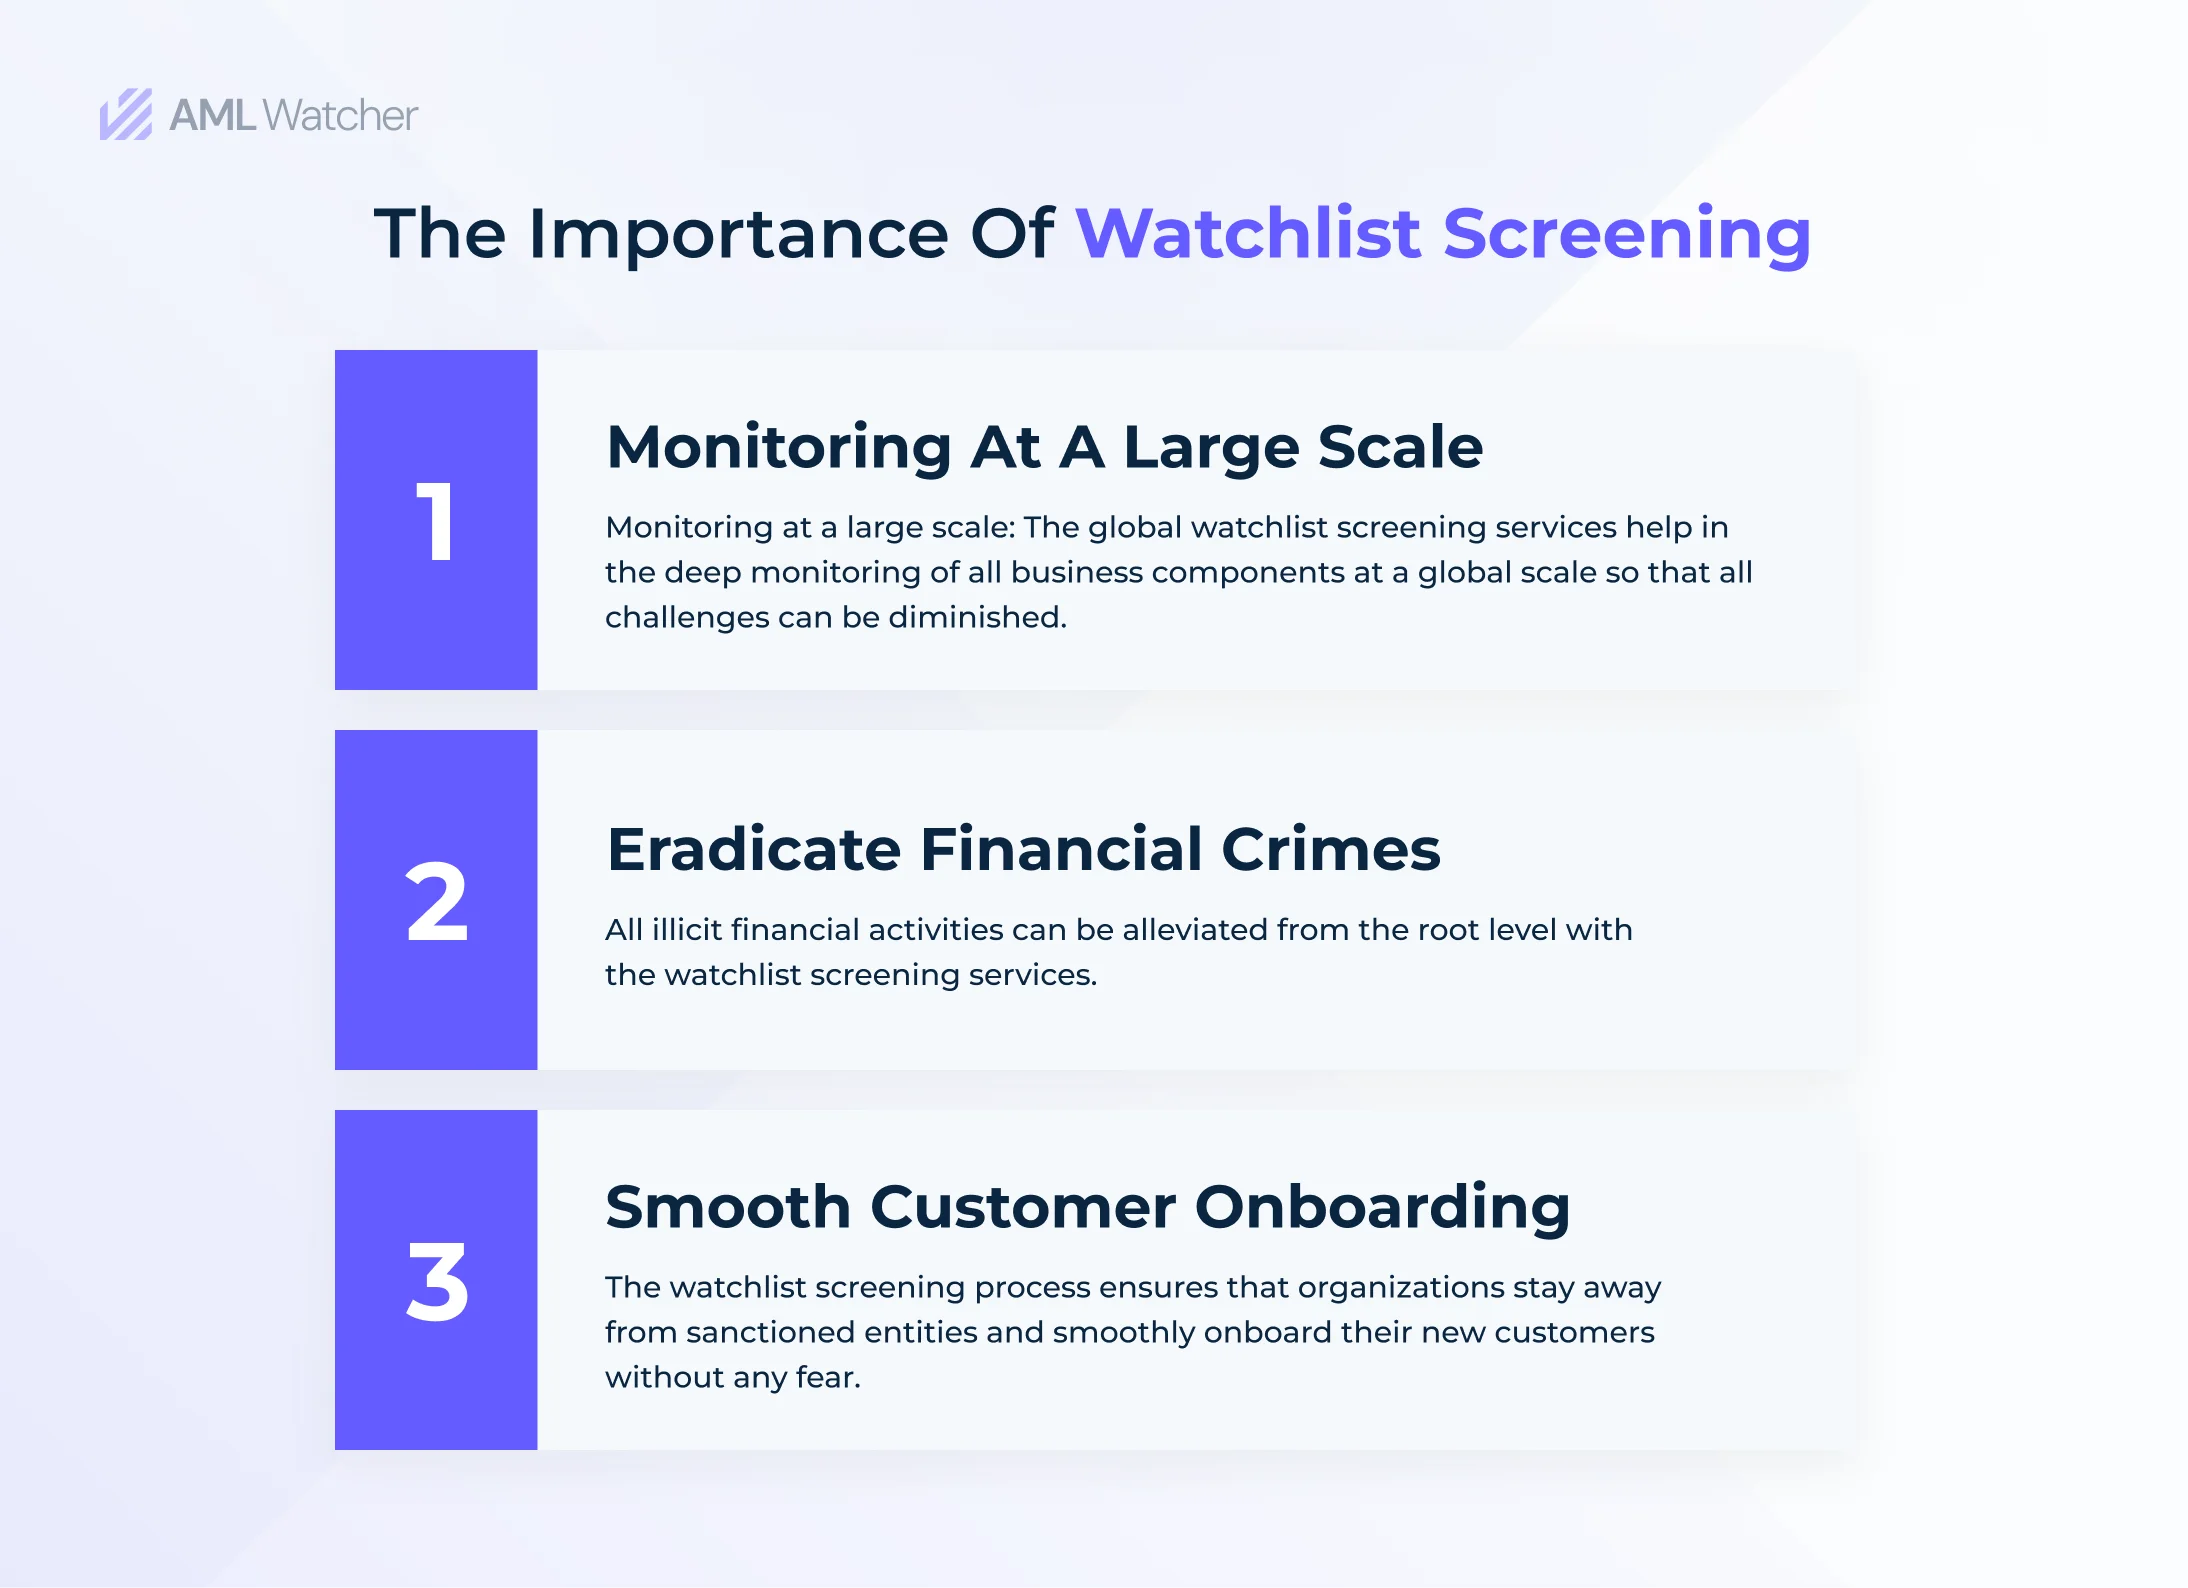 Along with security, watchlist screening also provides other advantages. 